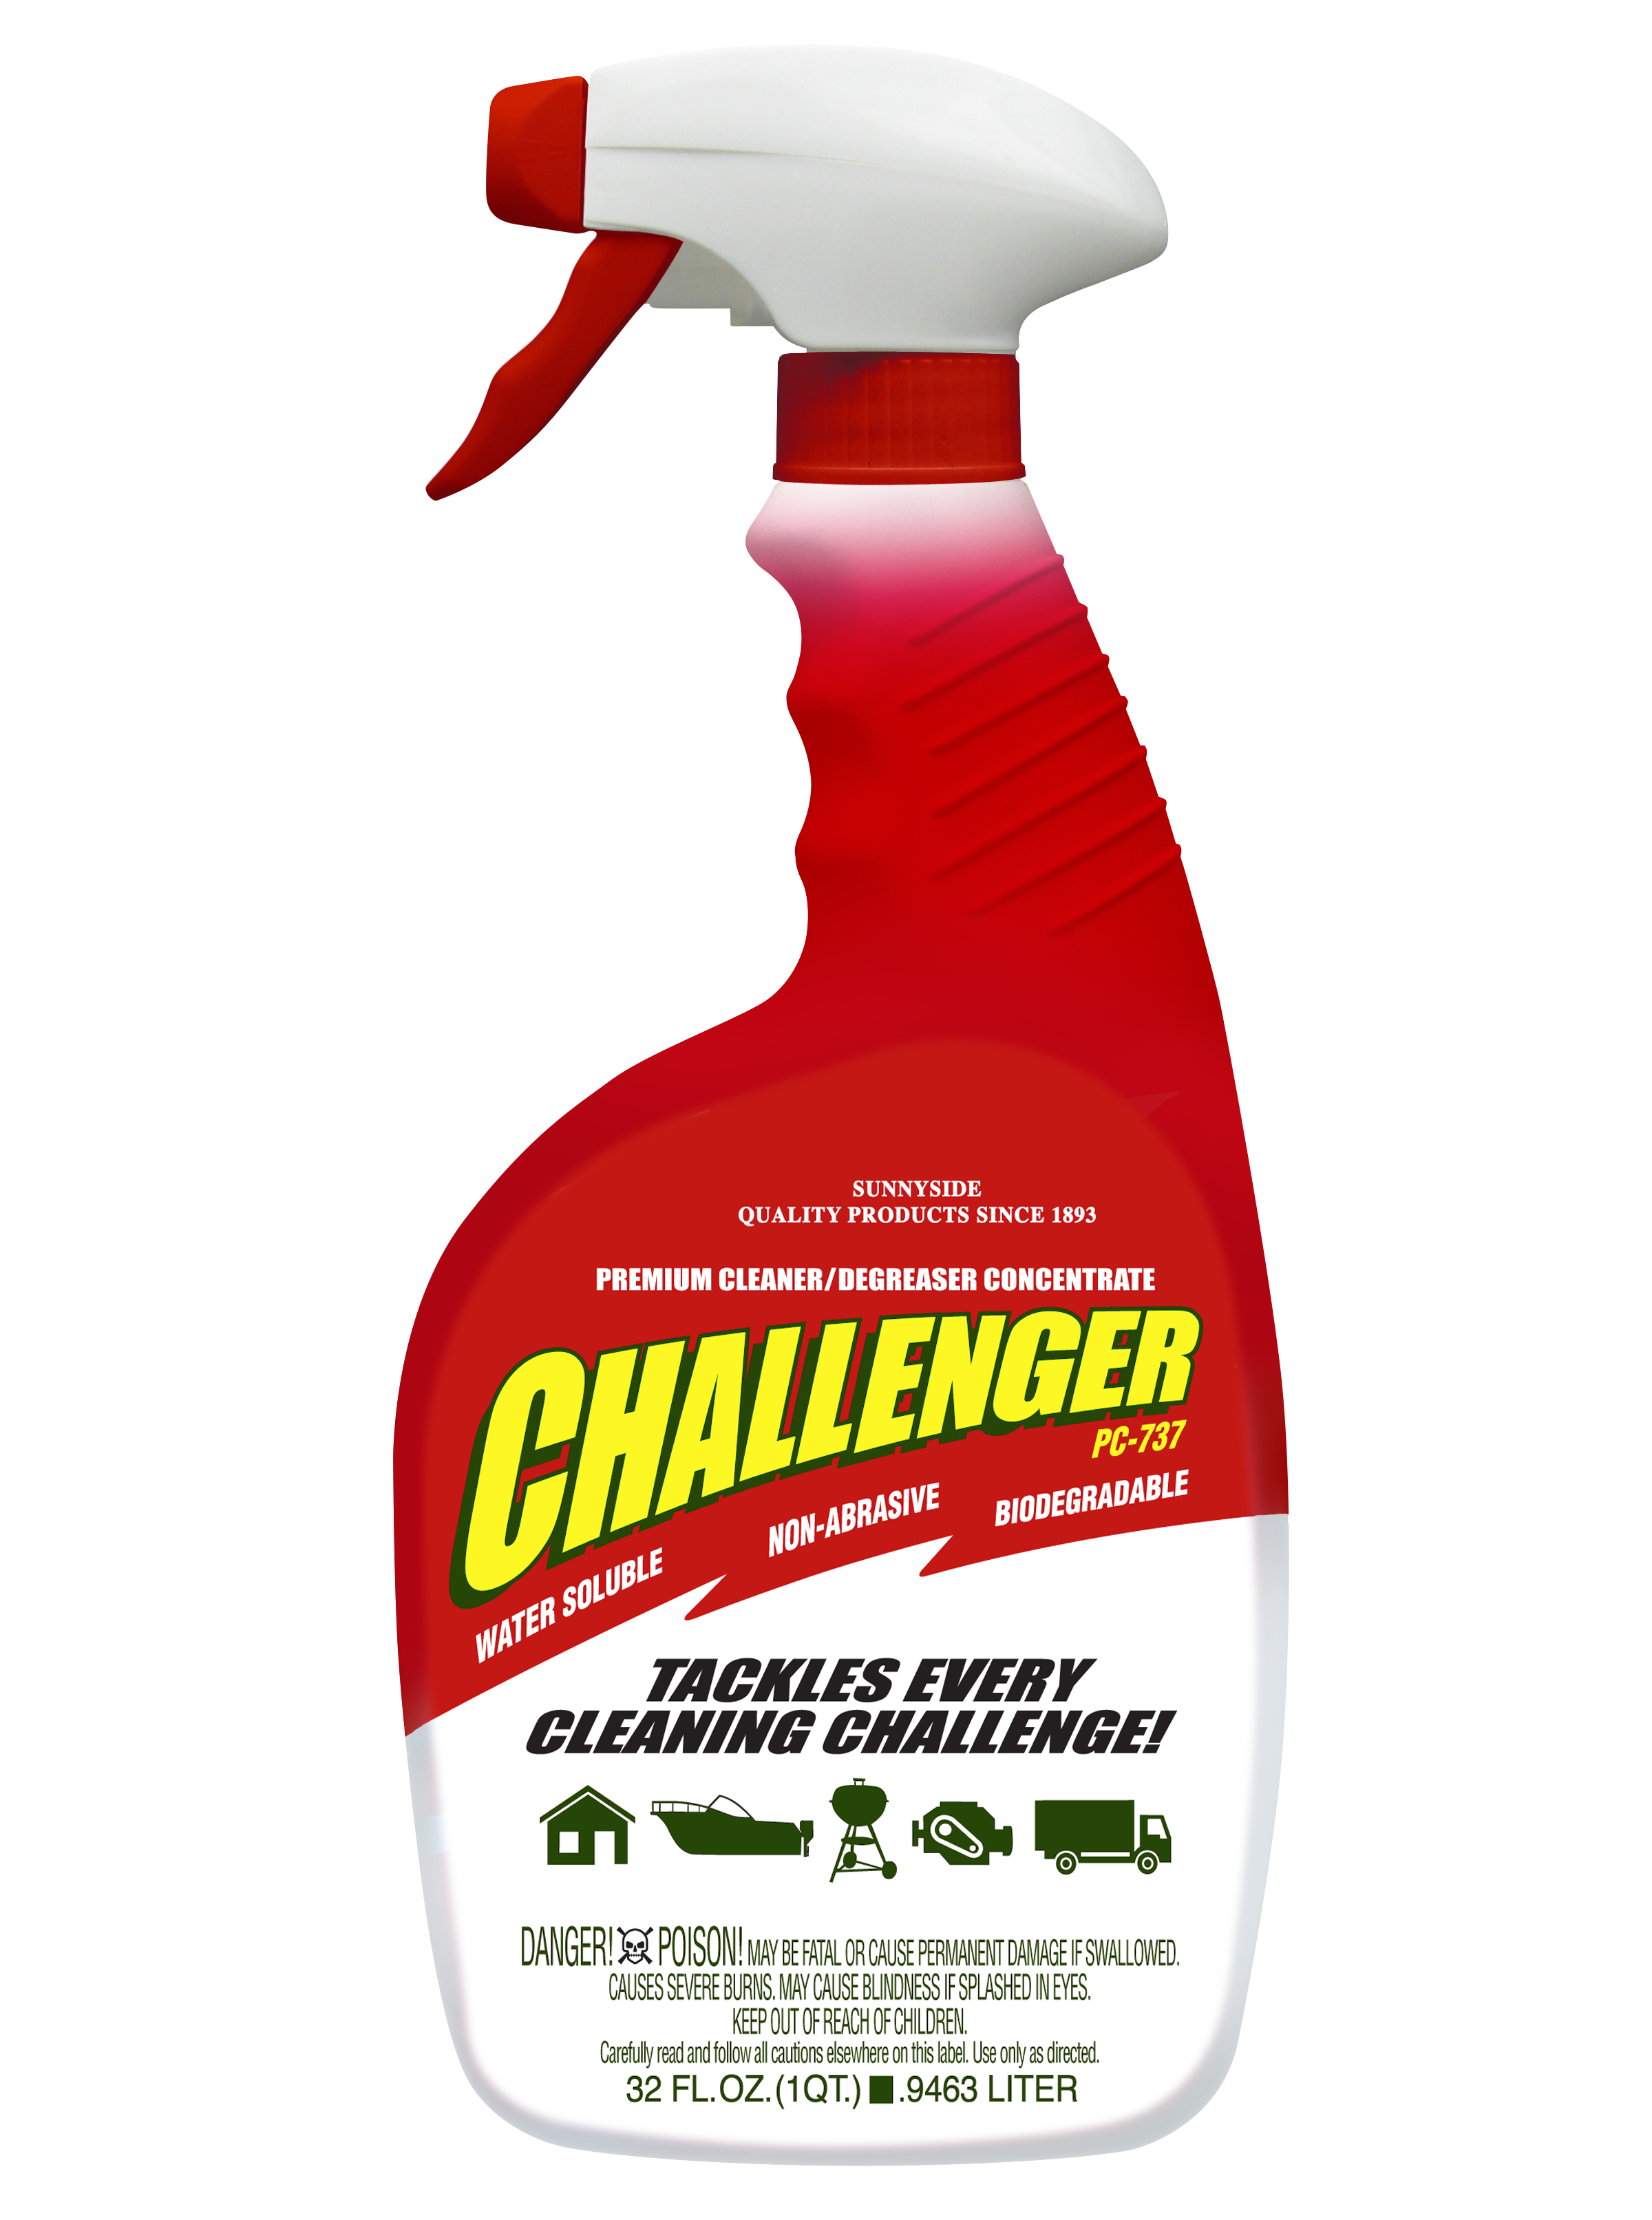 CHALLENGER CONC. DEGREASER Product Image